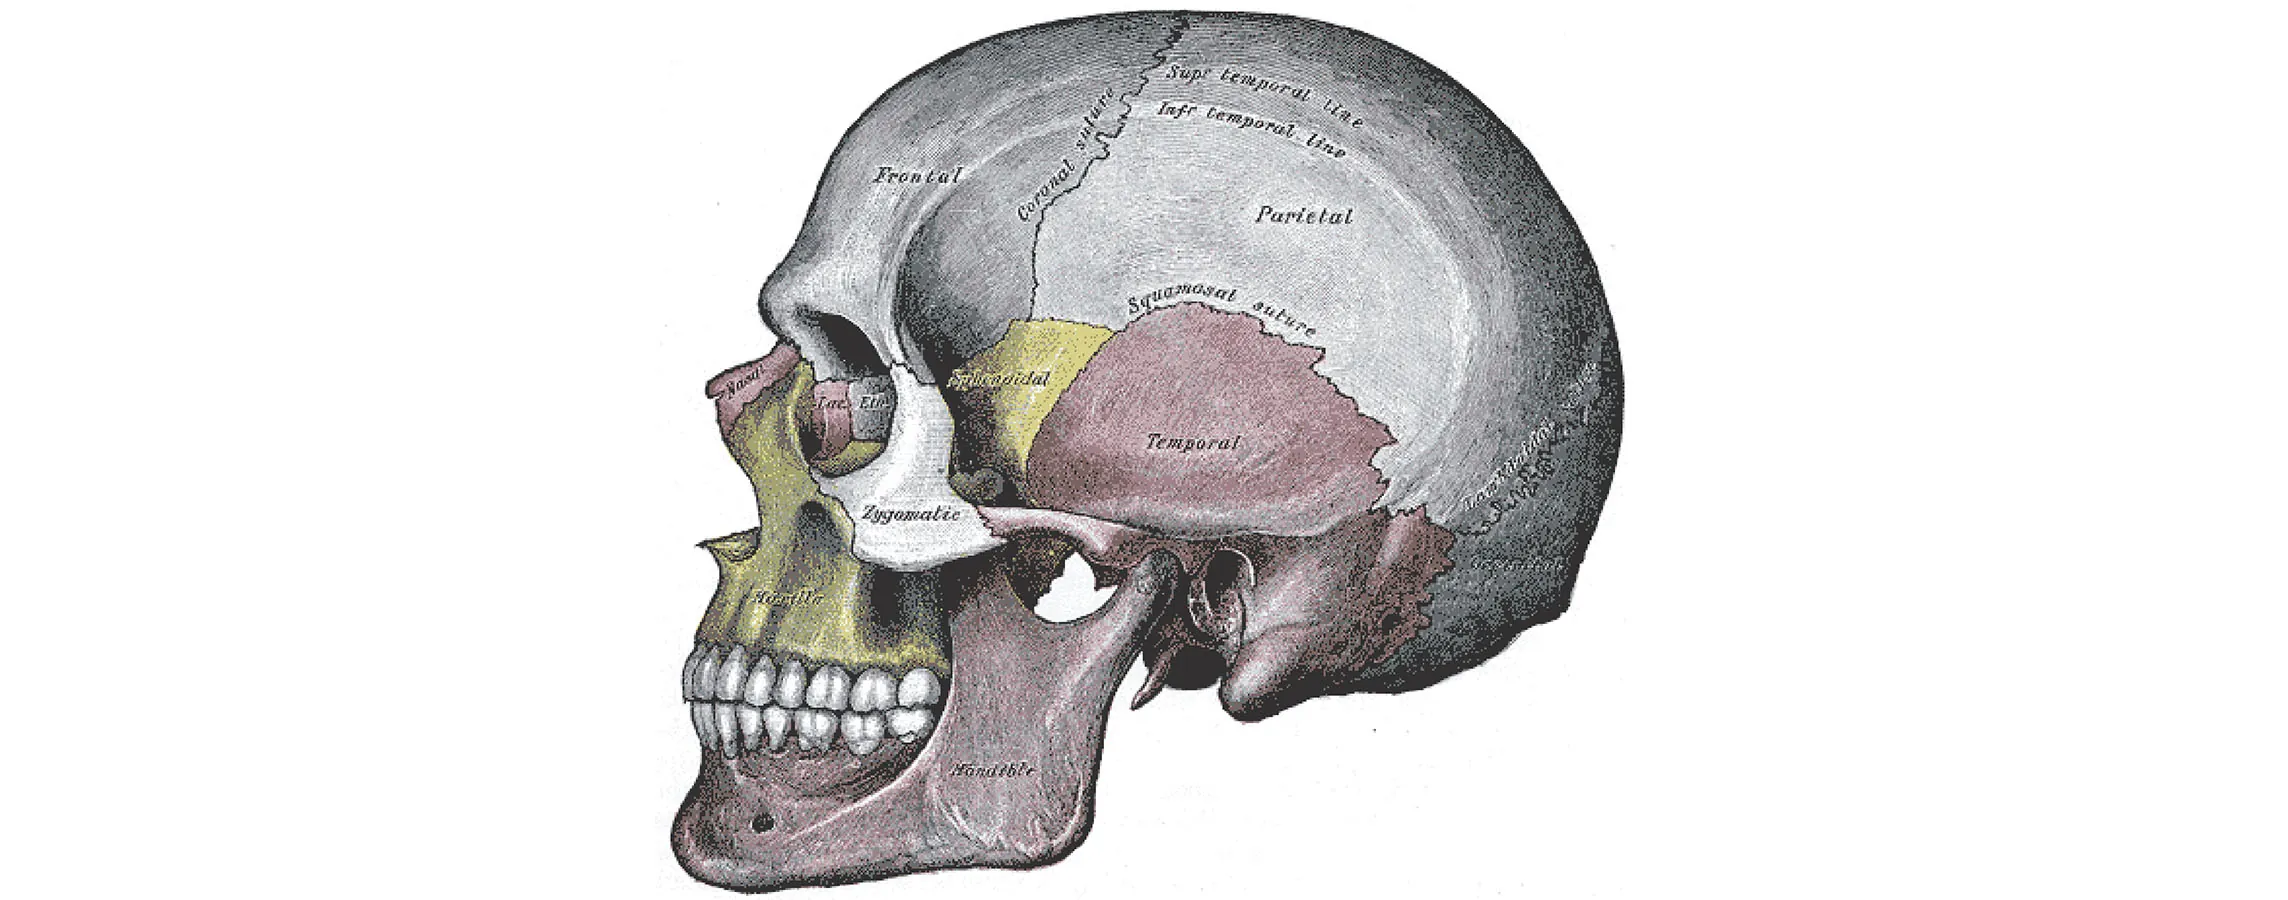 This image shows a side view of the human skull. The major parts of the cell are labeled.